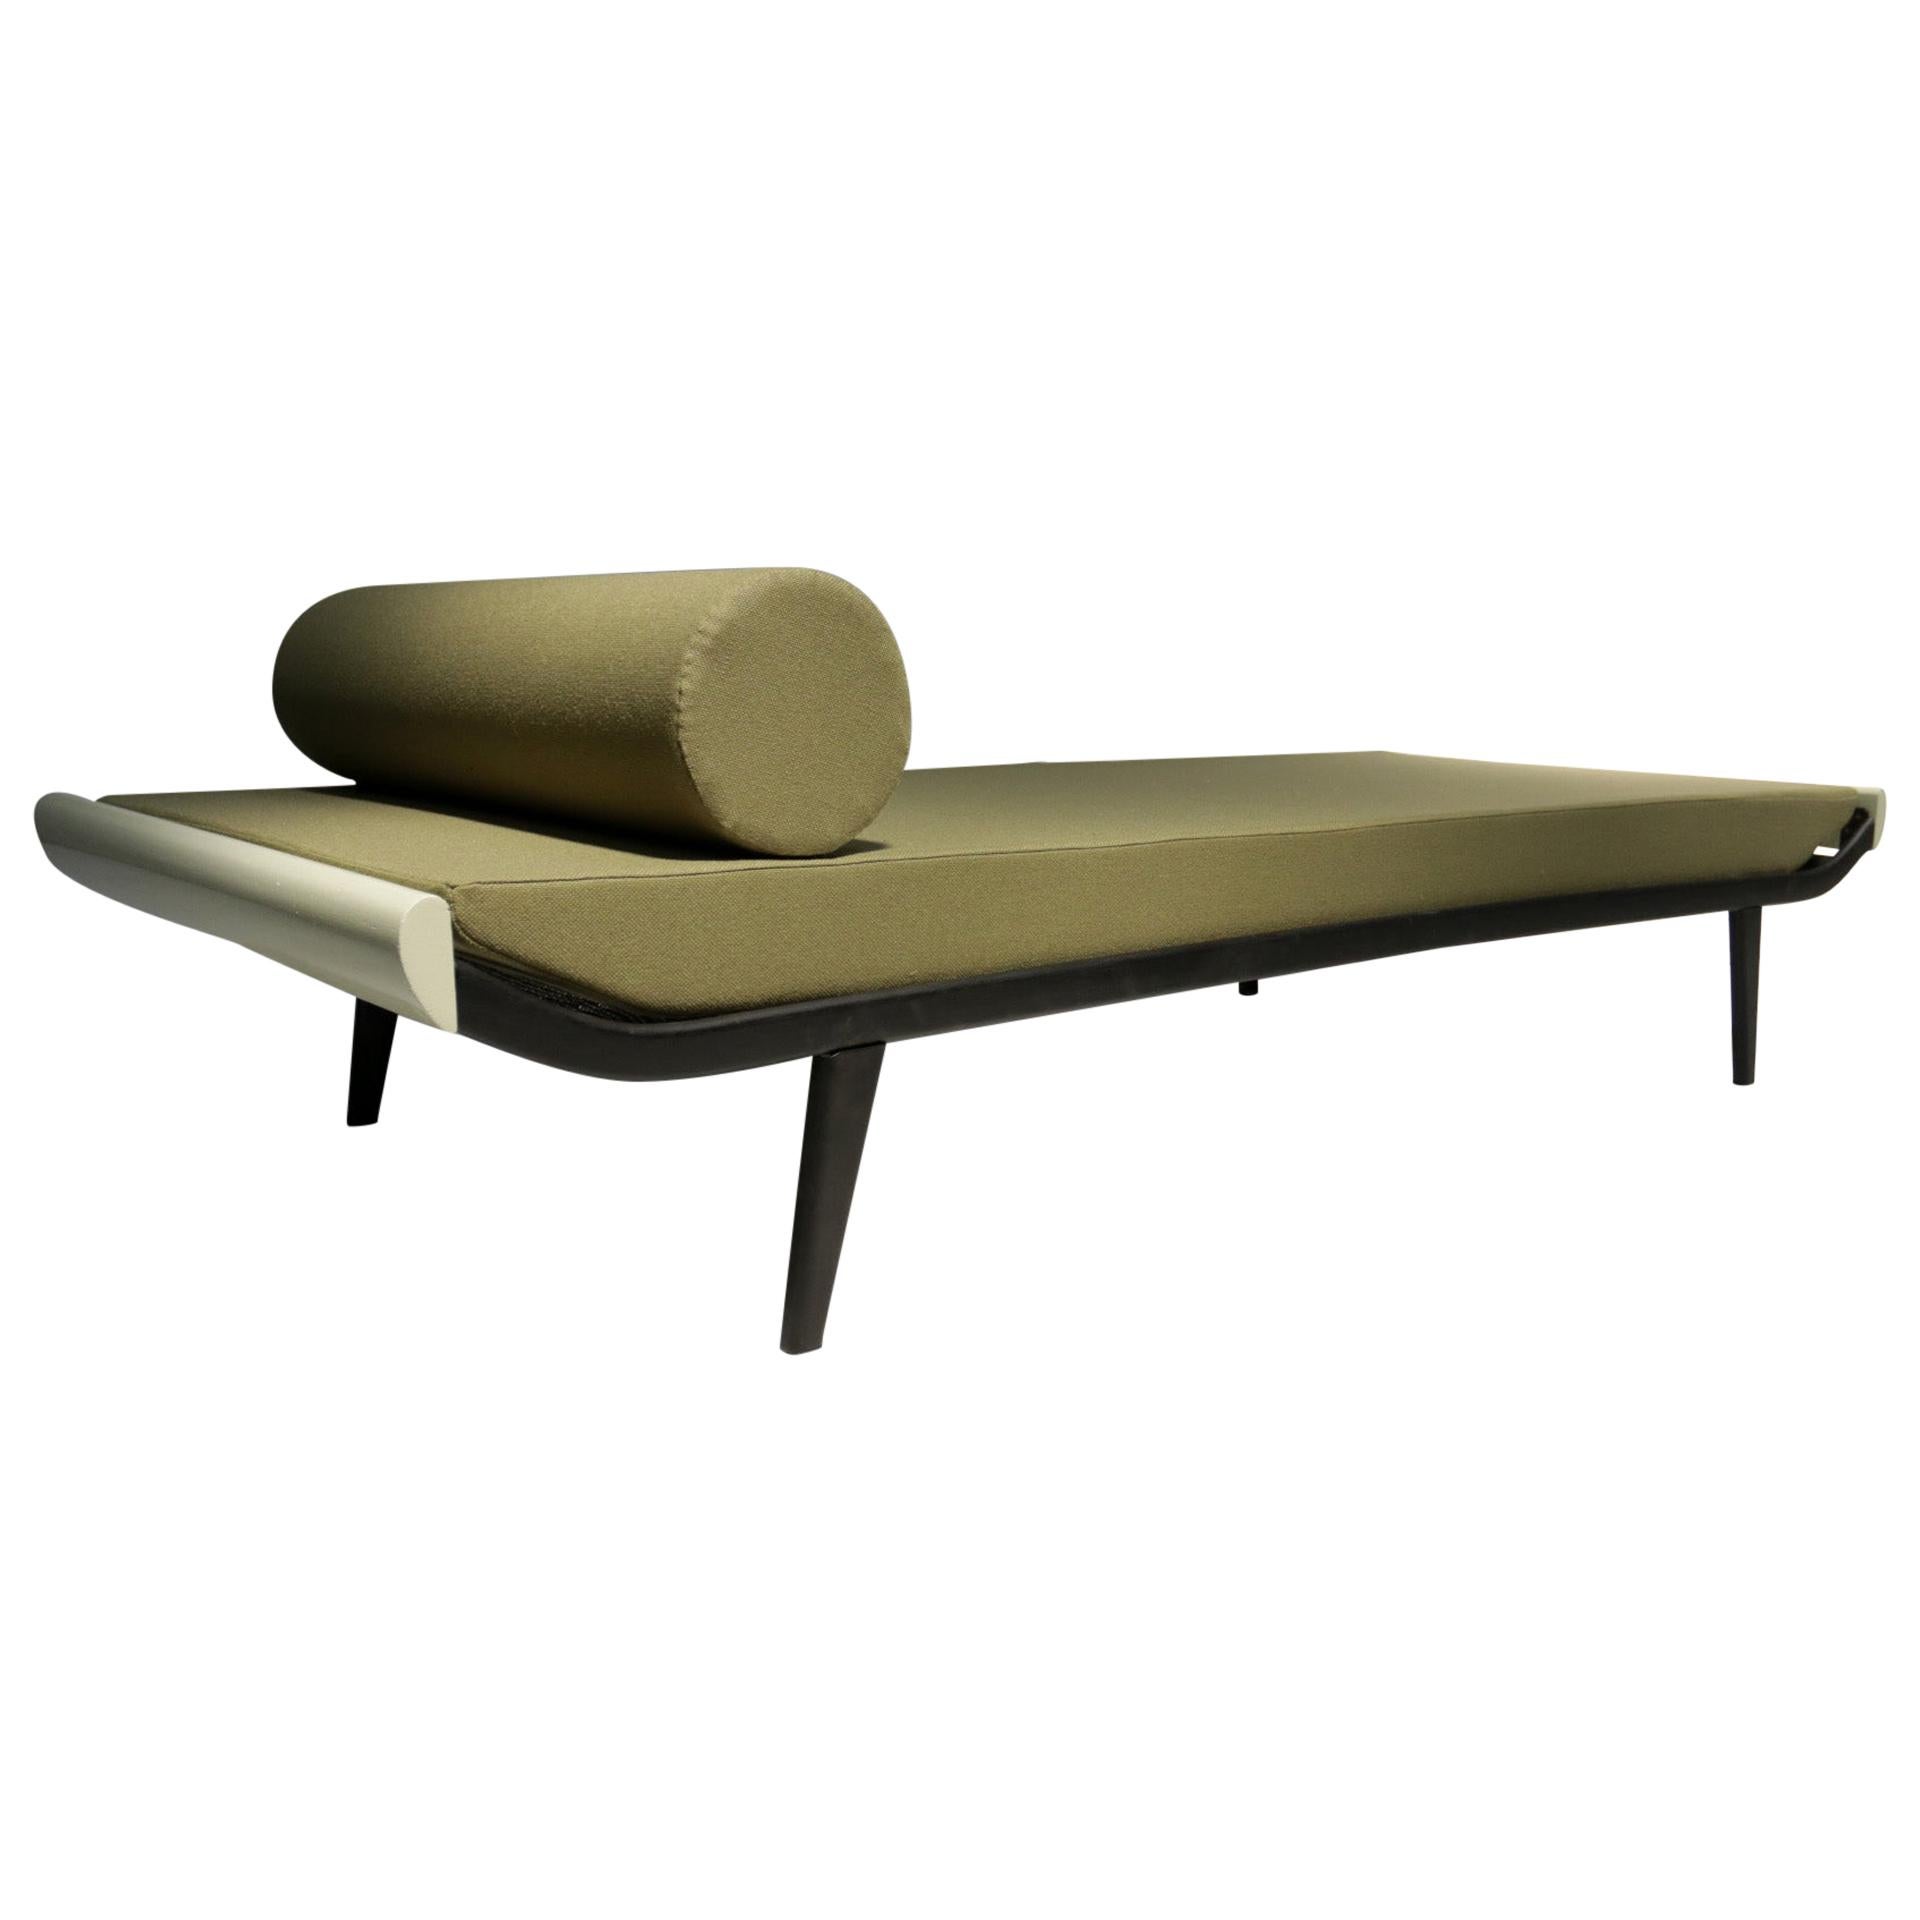 Mid-Century Modern Cleopatra Daybed Olive green by Dick Cordemeijer, 1953